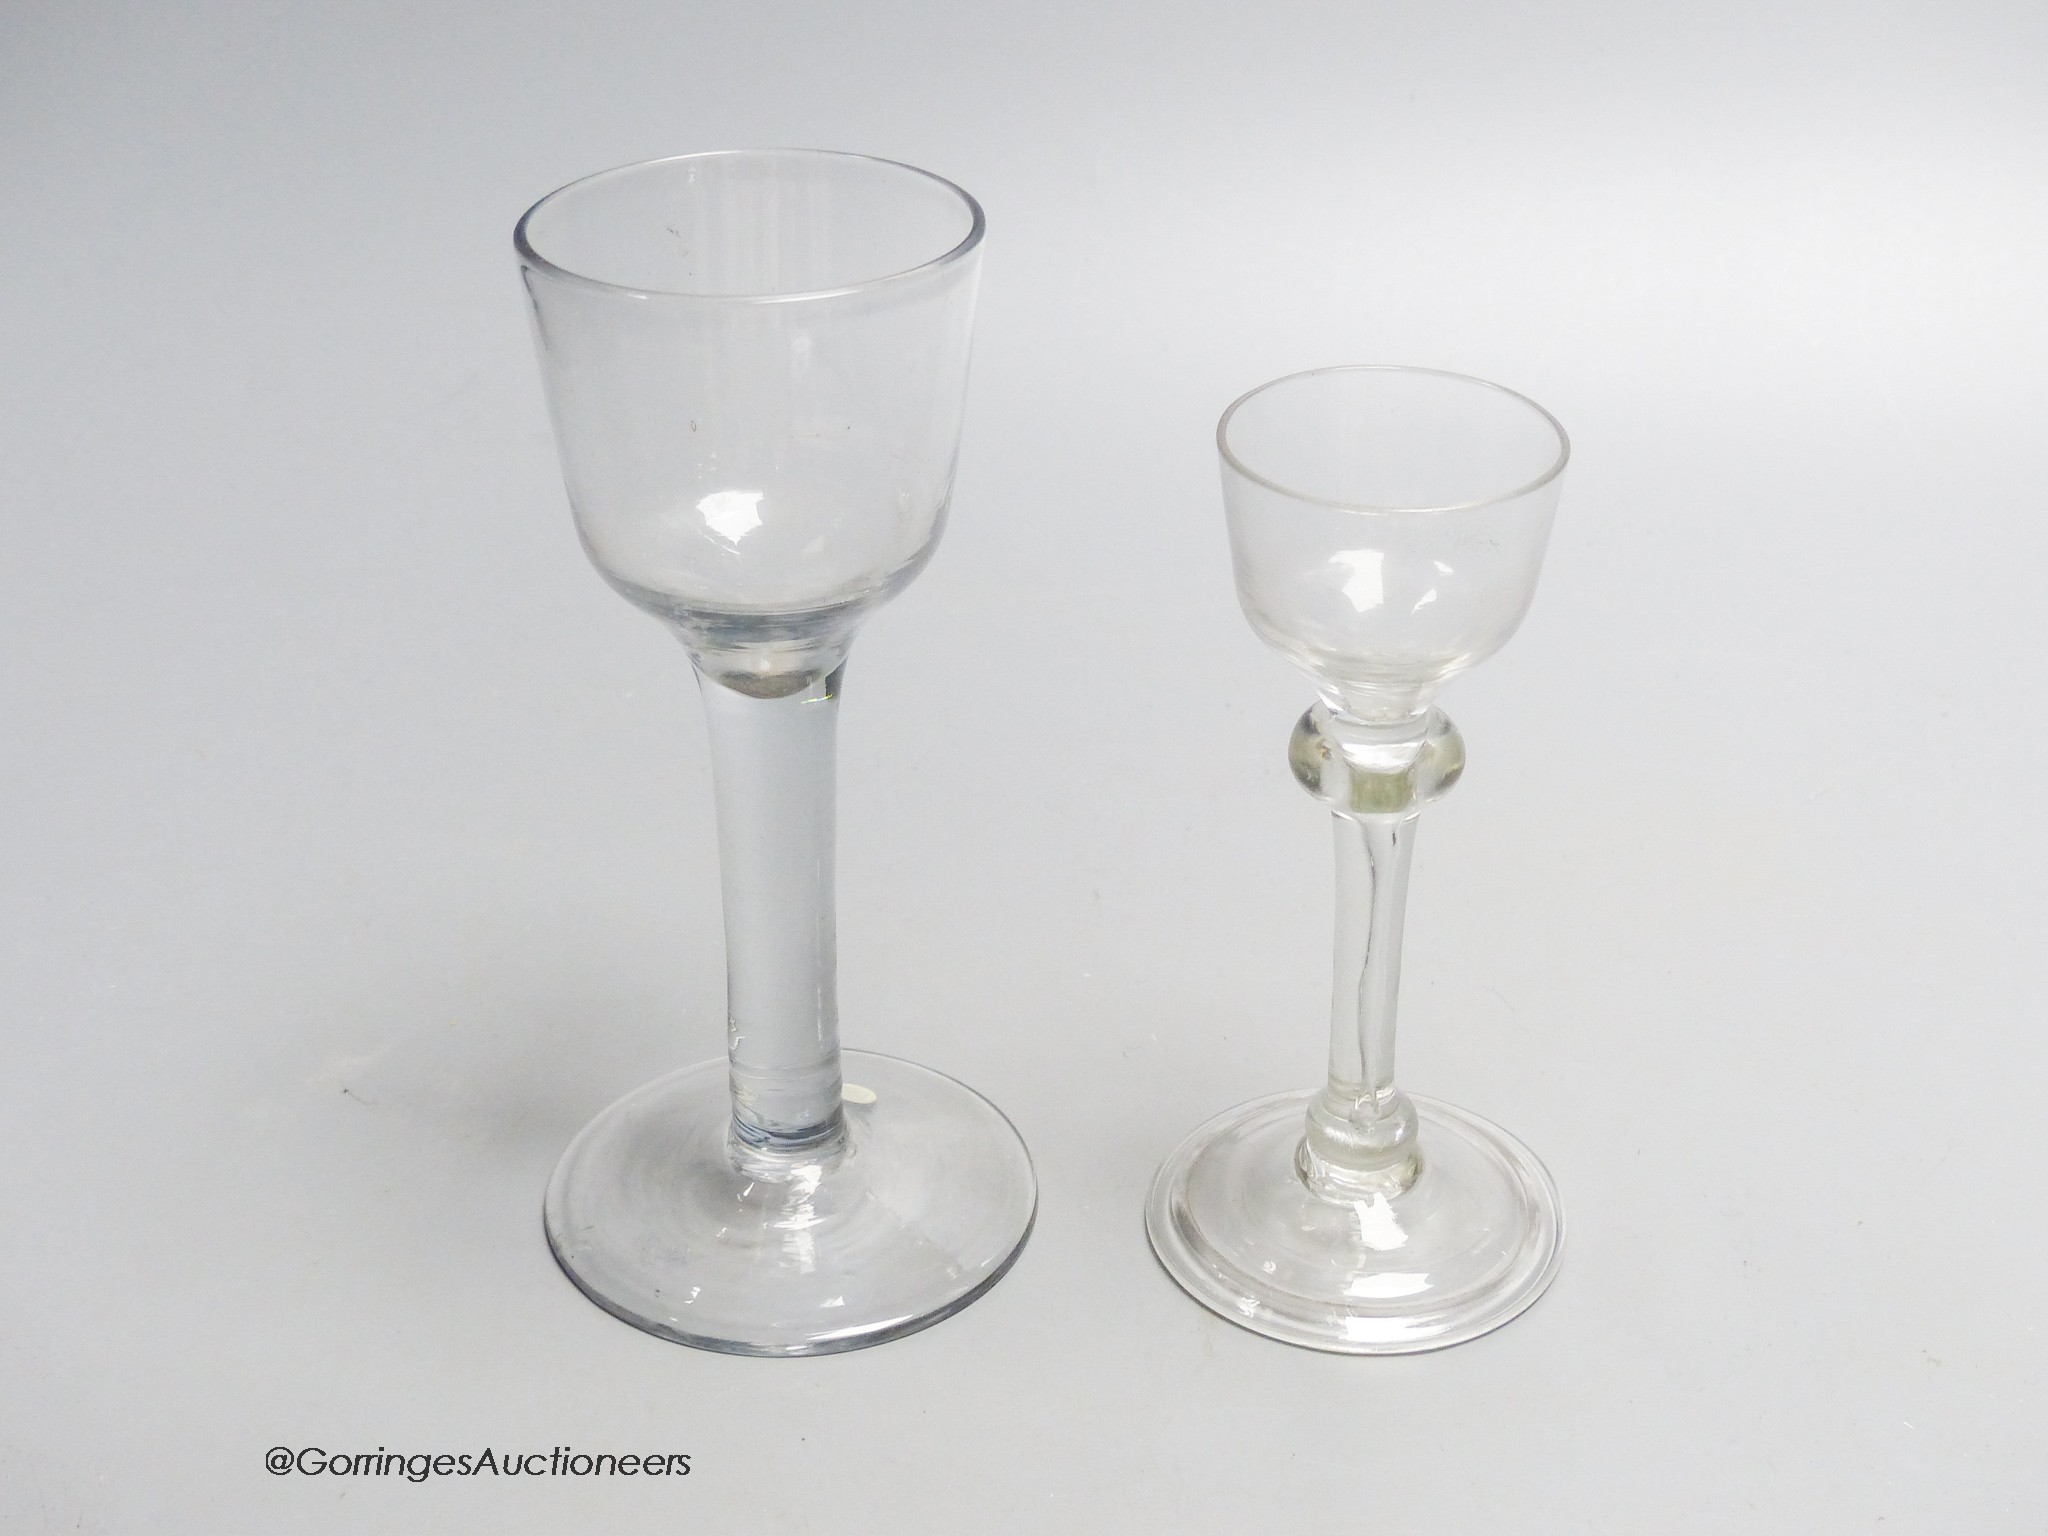 Two Georgian drinking glasses including a light baluster type cordial glass and a plain stem wine glass, tallest 16.5cm